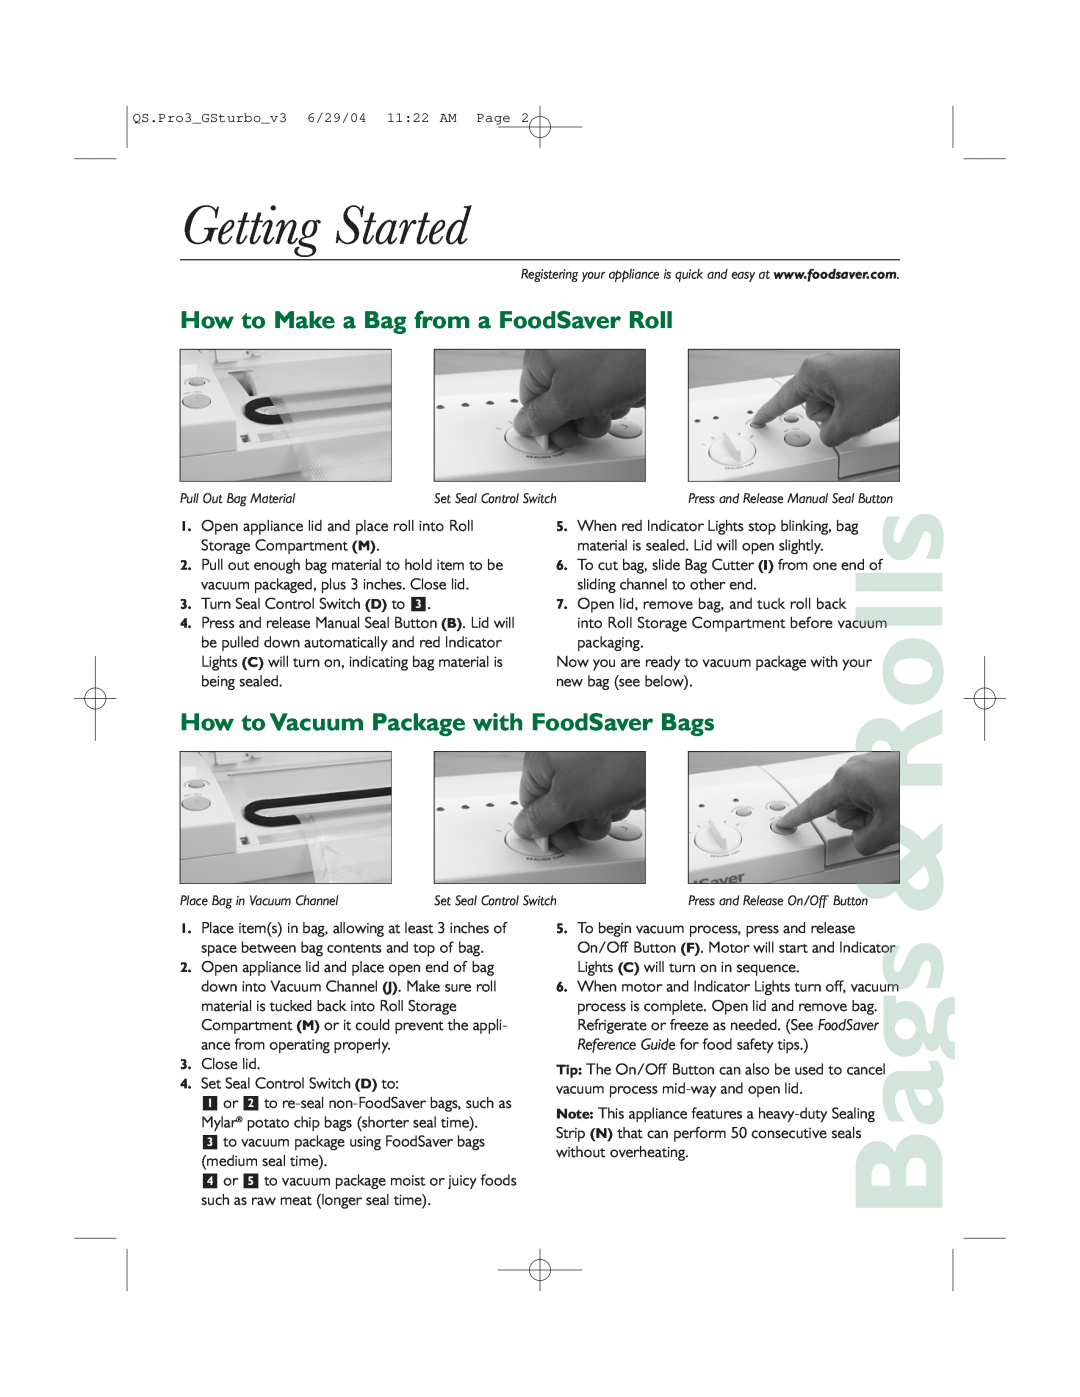 FoodSaver Professional III, GameSaver Turbo Getting Started, How to Make a Bag from a FoodSaver Roll, Bags, Rolls 